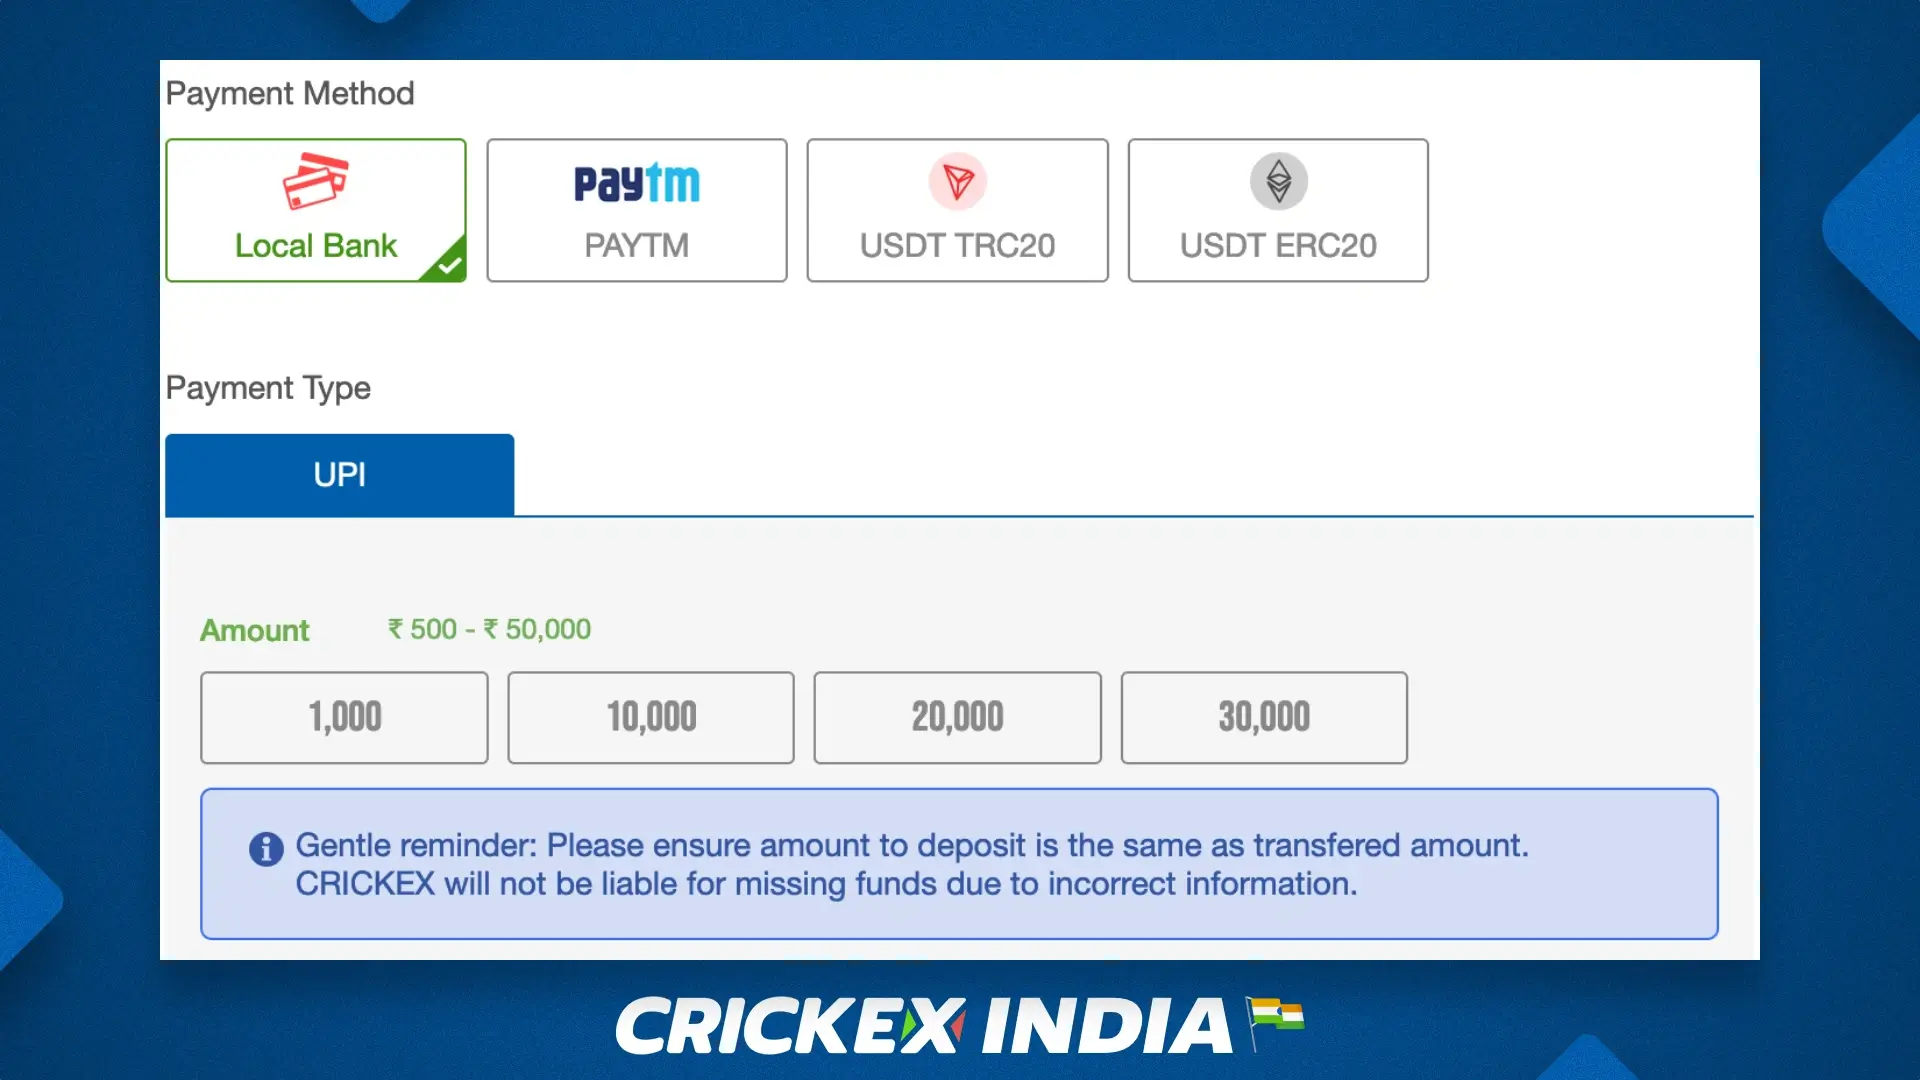 Payment systems available for depositing at Crickex